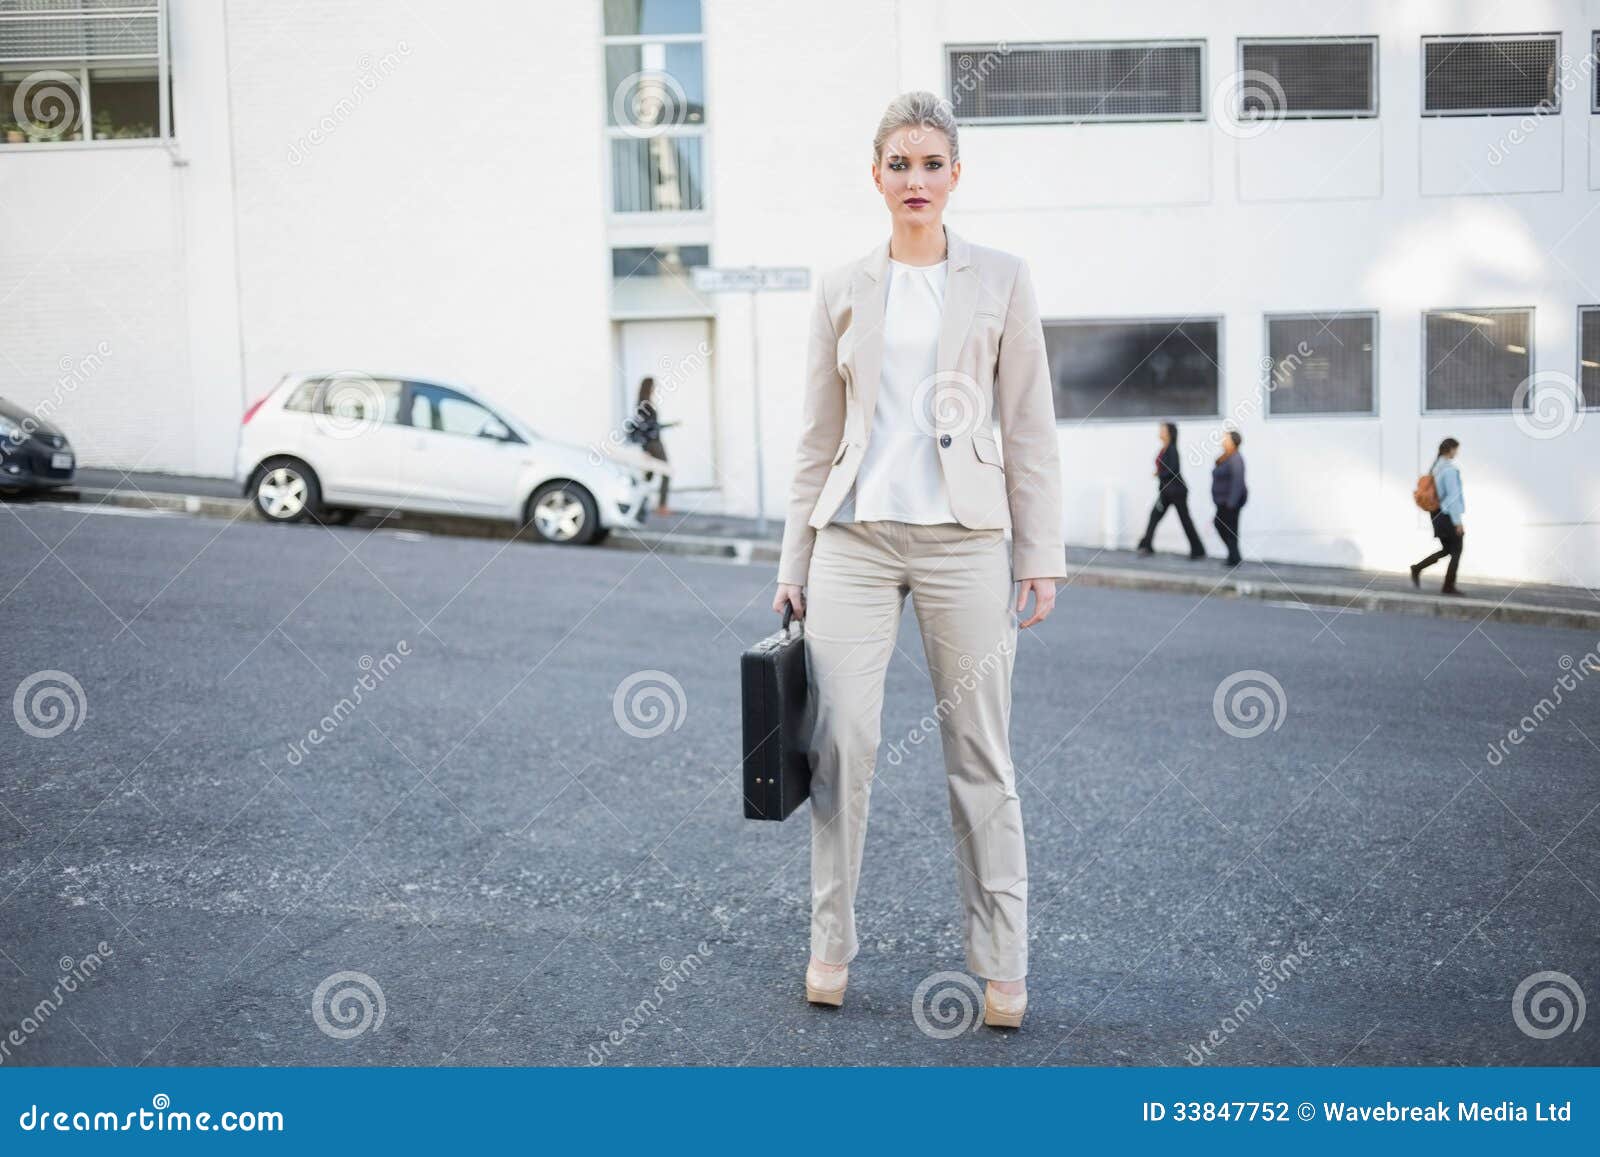 Serious Stylish Businesswoman Holding Briefcase Posing Stock Photo ...